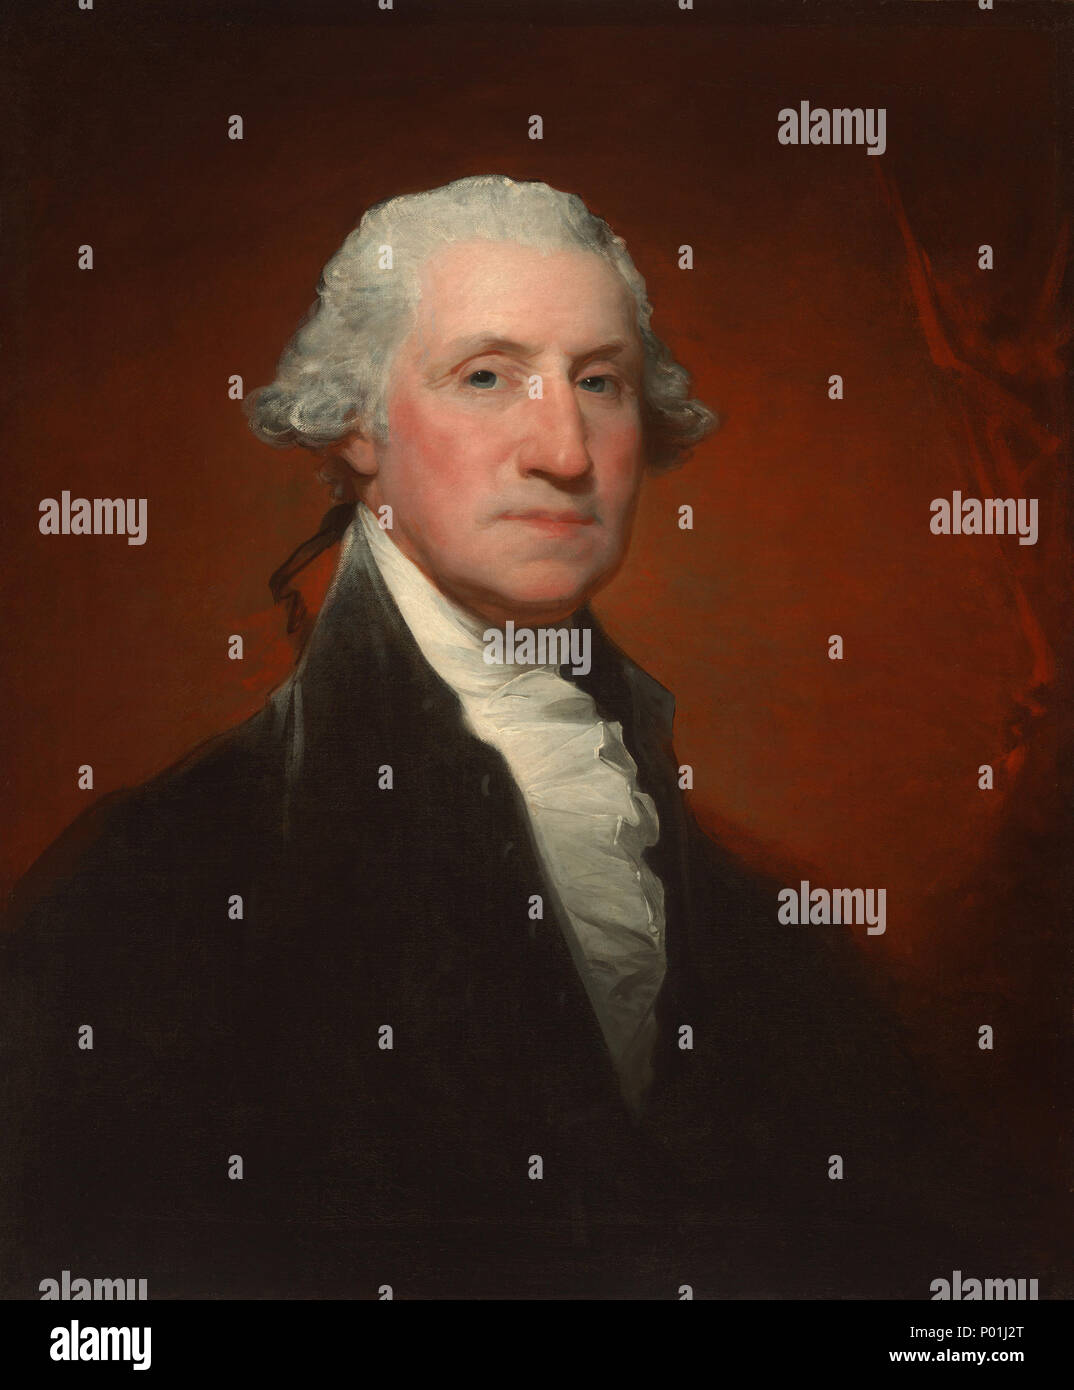 Painting; oil on canvas; overall: 73.8 x 61.1 cm (29 1/16 x 24 1/16 in.) framed: 92.7 x 80 x 9.5 cm (36 1/2 x 31 1/2 x 3 3/4 in.); 10 George Washington (Vaughan-Sinclair portrait) A18269 Stock Photo